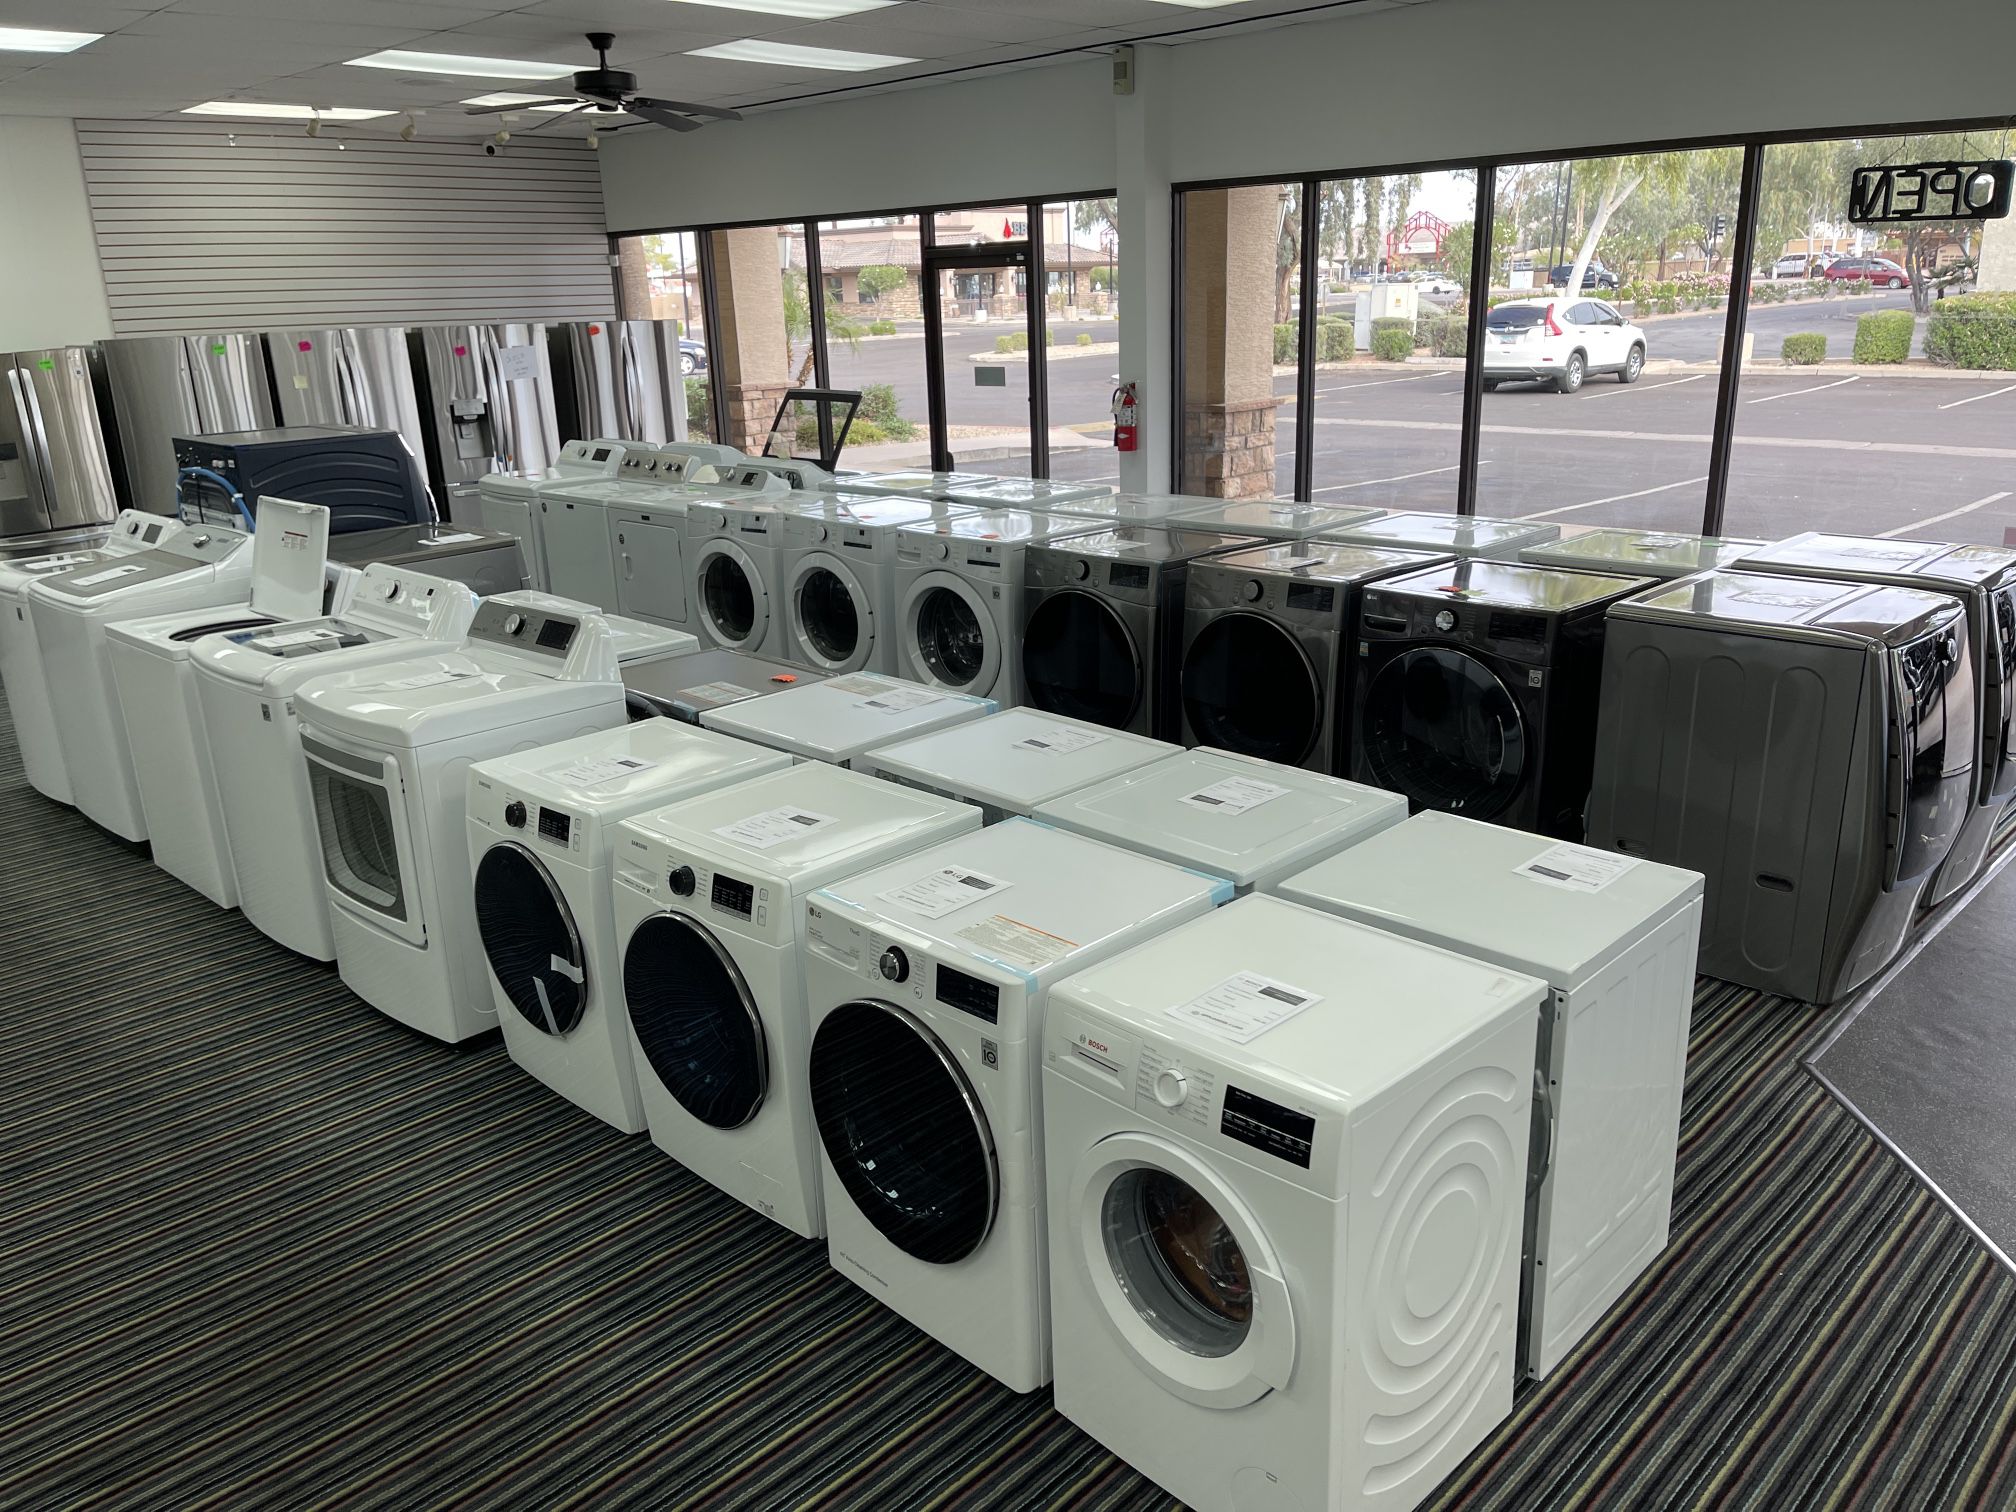 🔥On Sale Now! New Washers And Dryers🔥